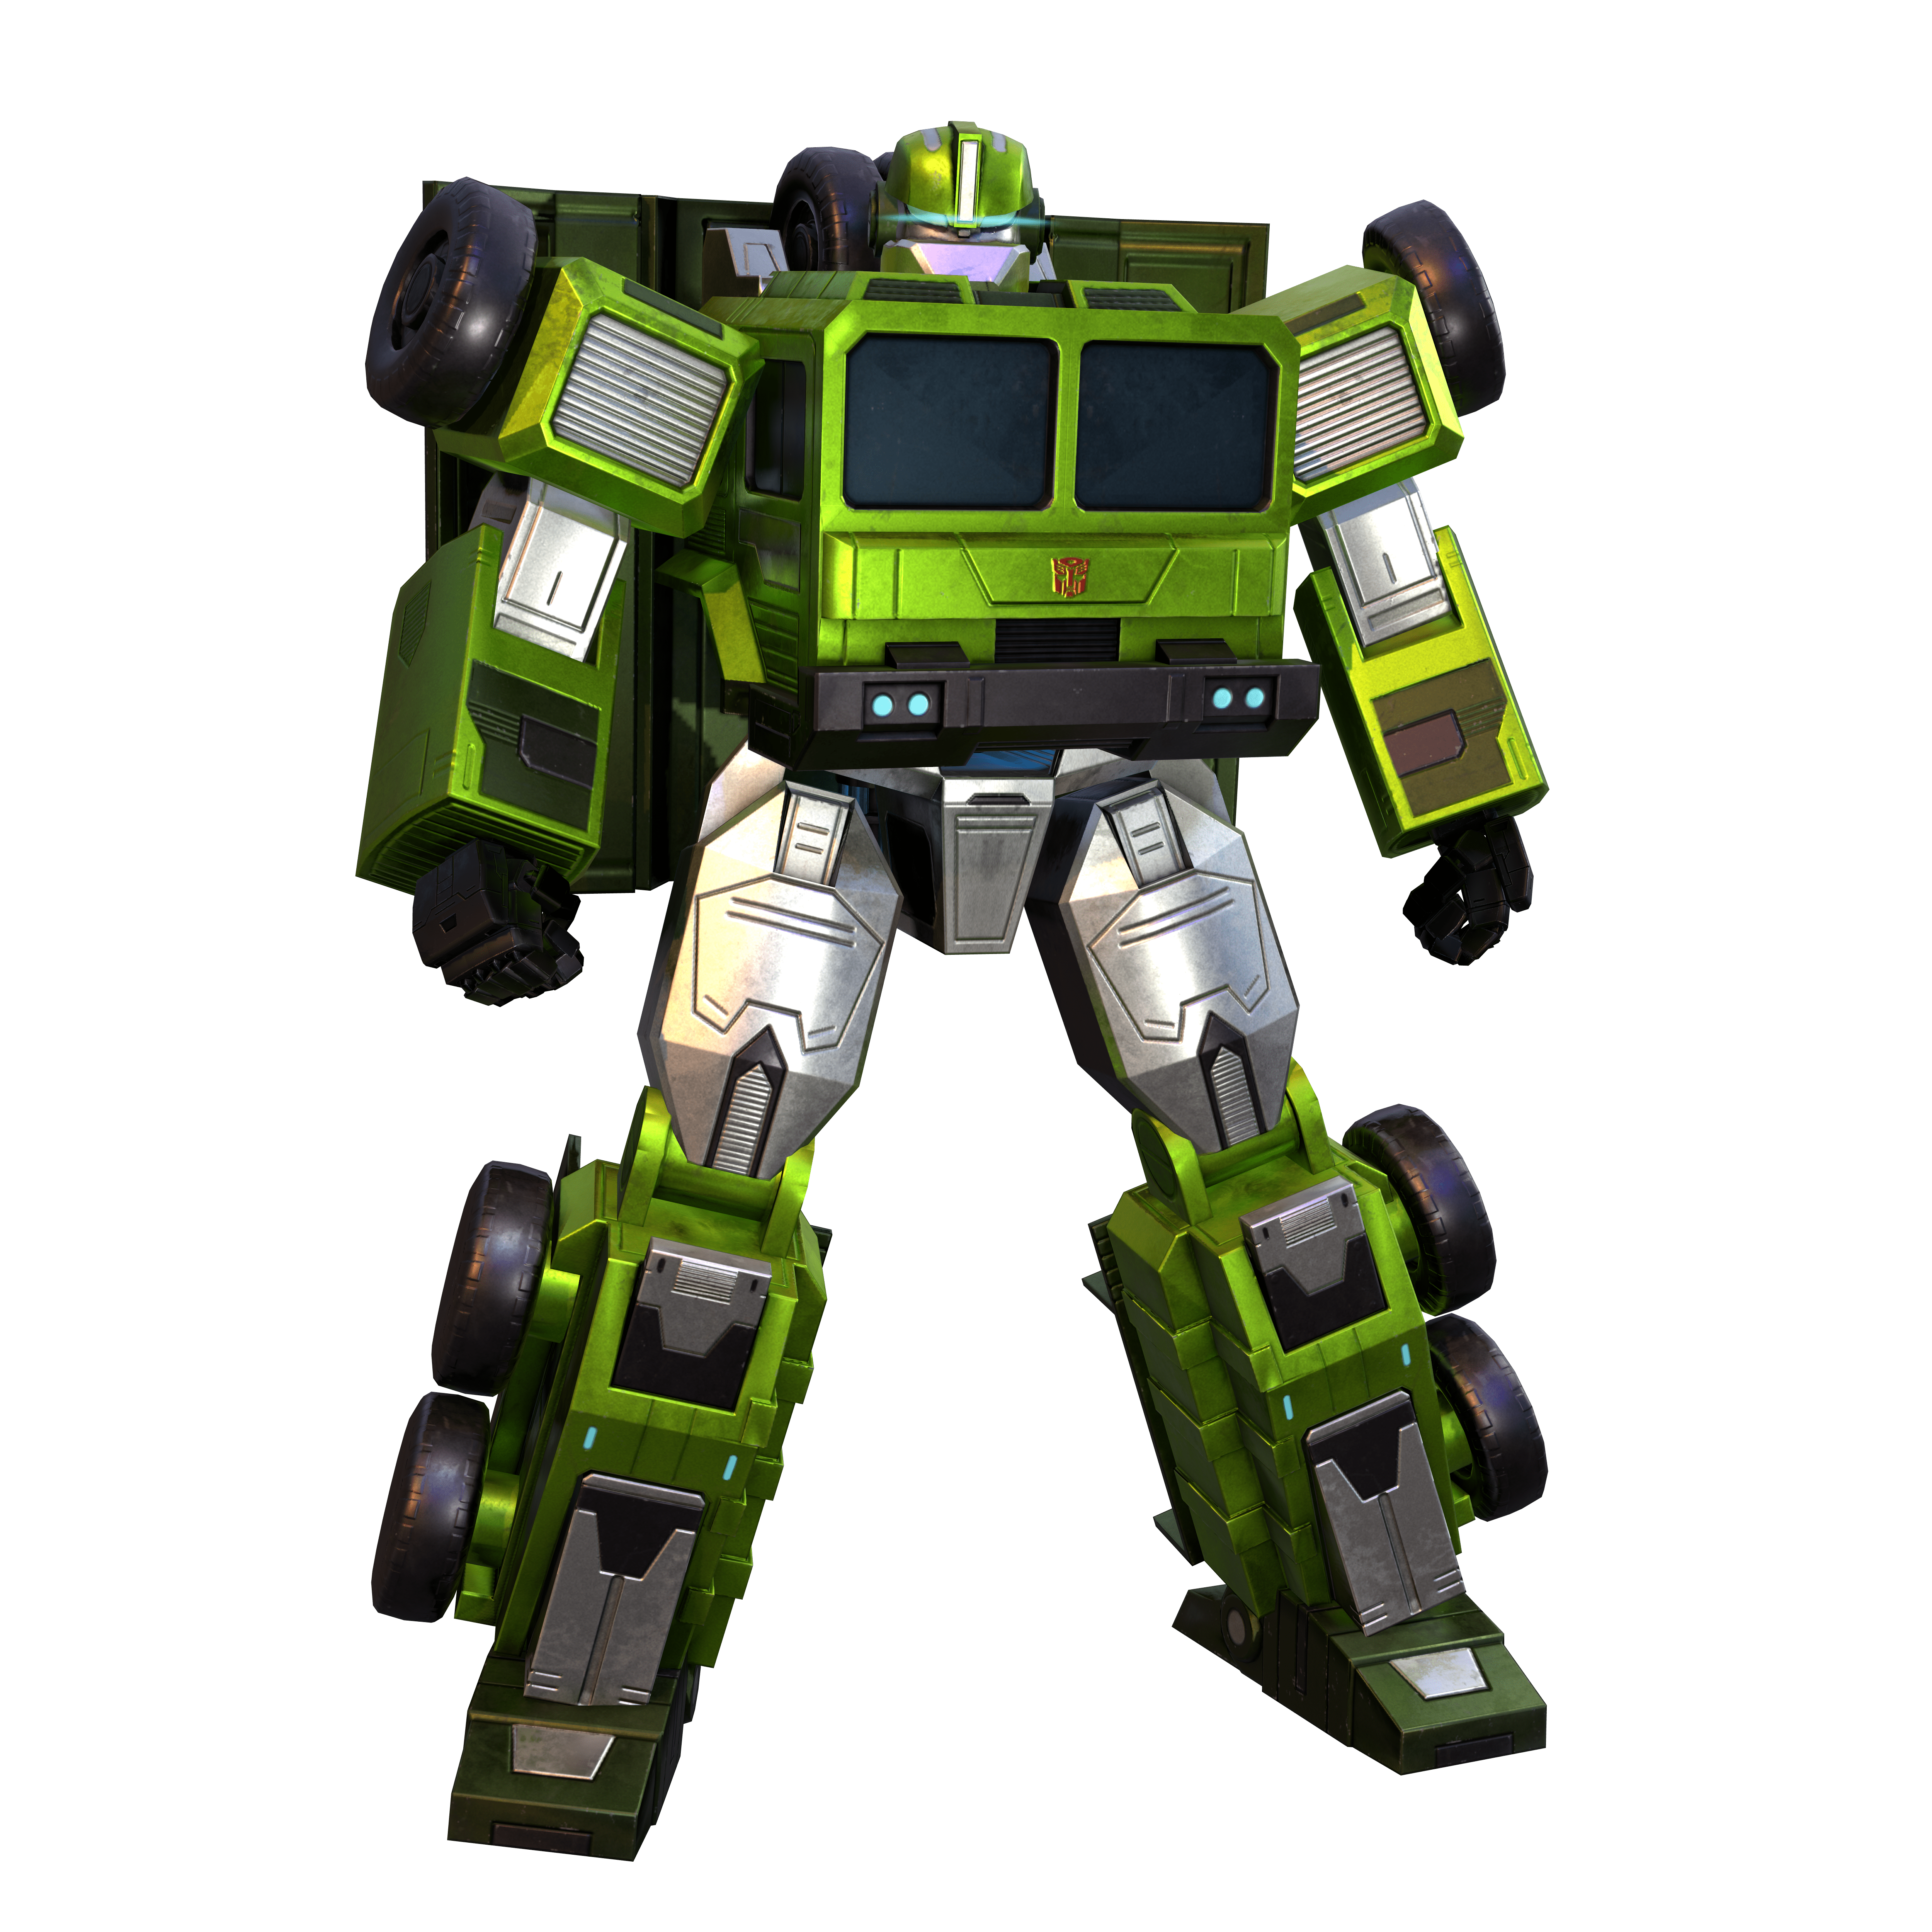 Knock Out, Transformers: Earth Wars Wikia